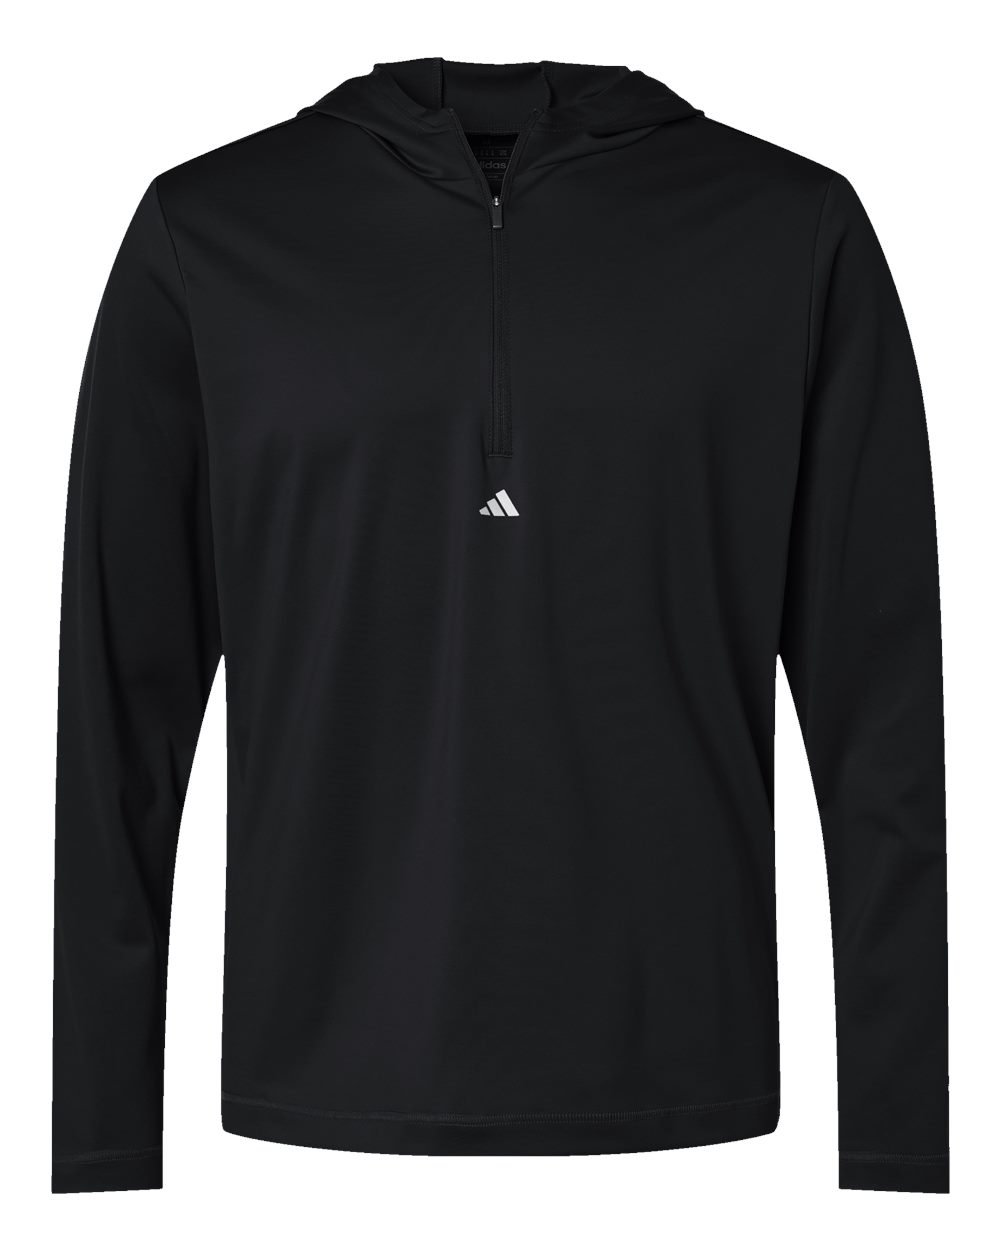 Adidas A596 Lightweight Performance Quarter-Zip Hooded Pullover #color_Black